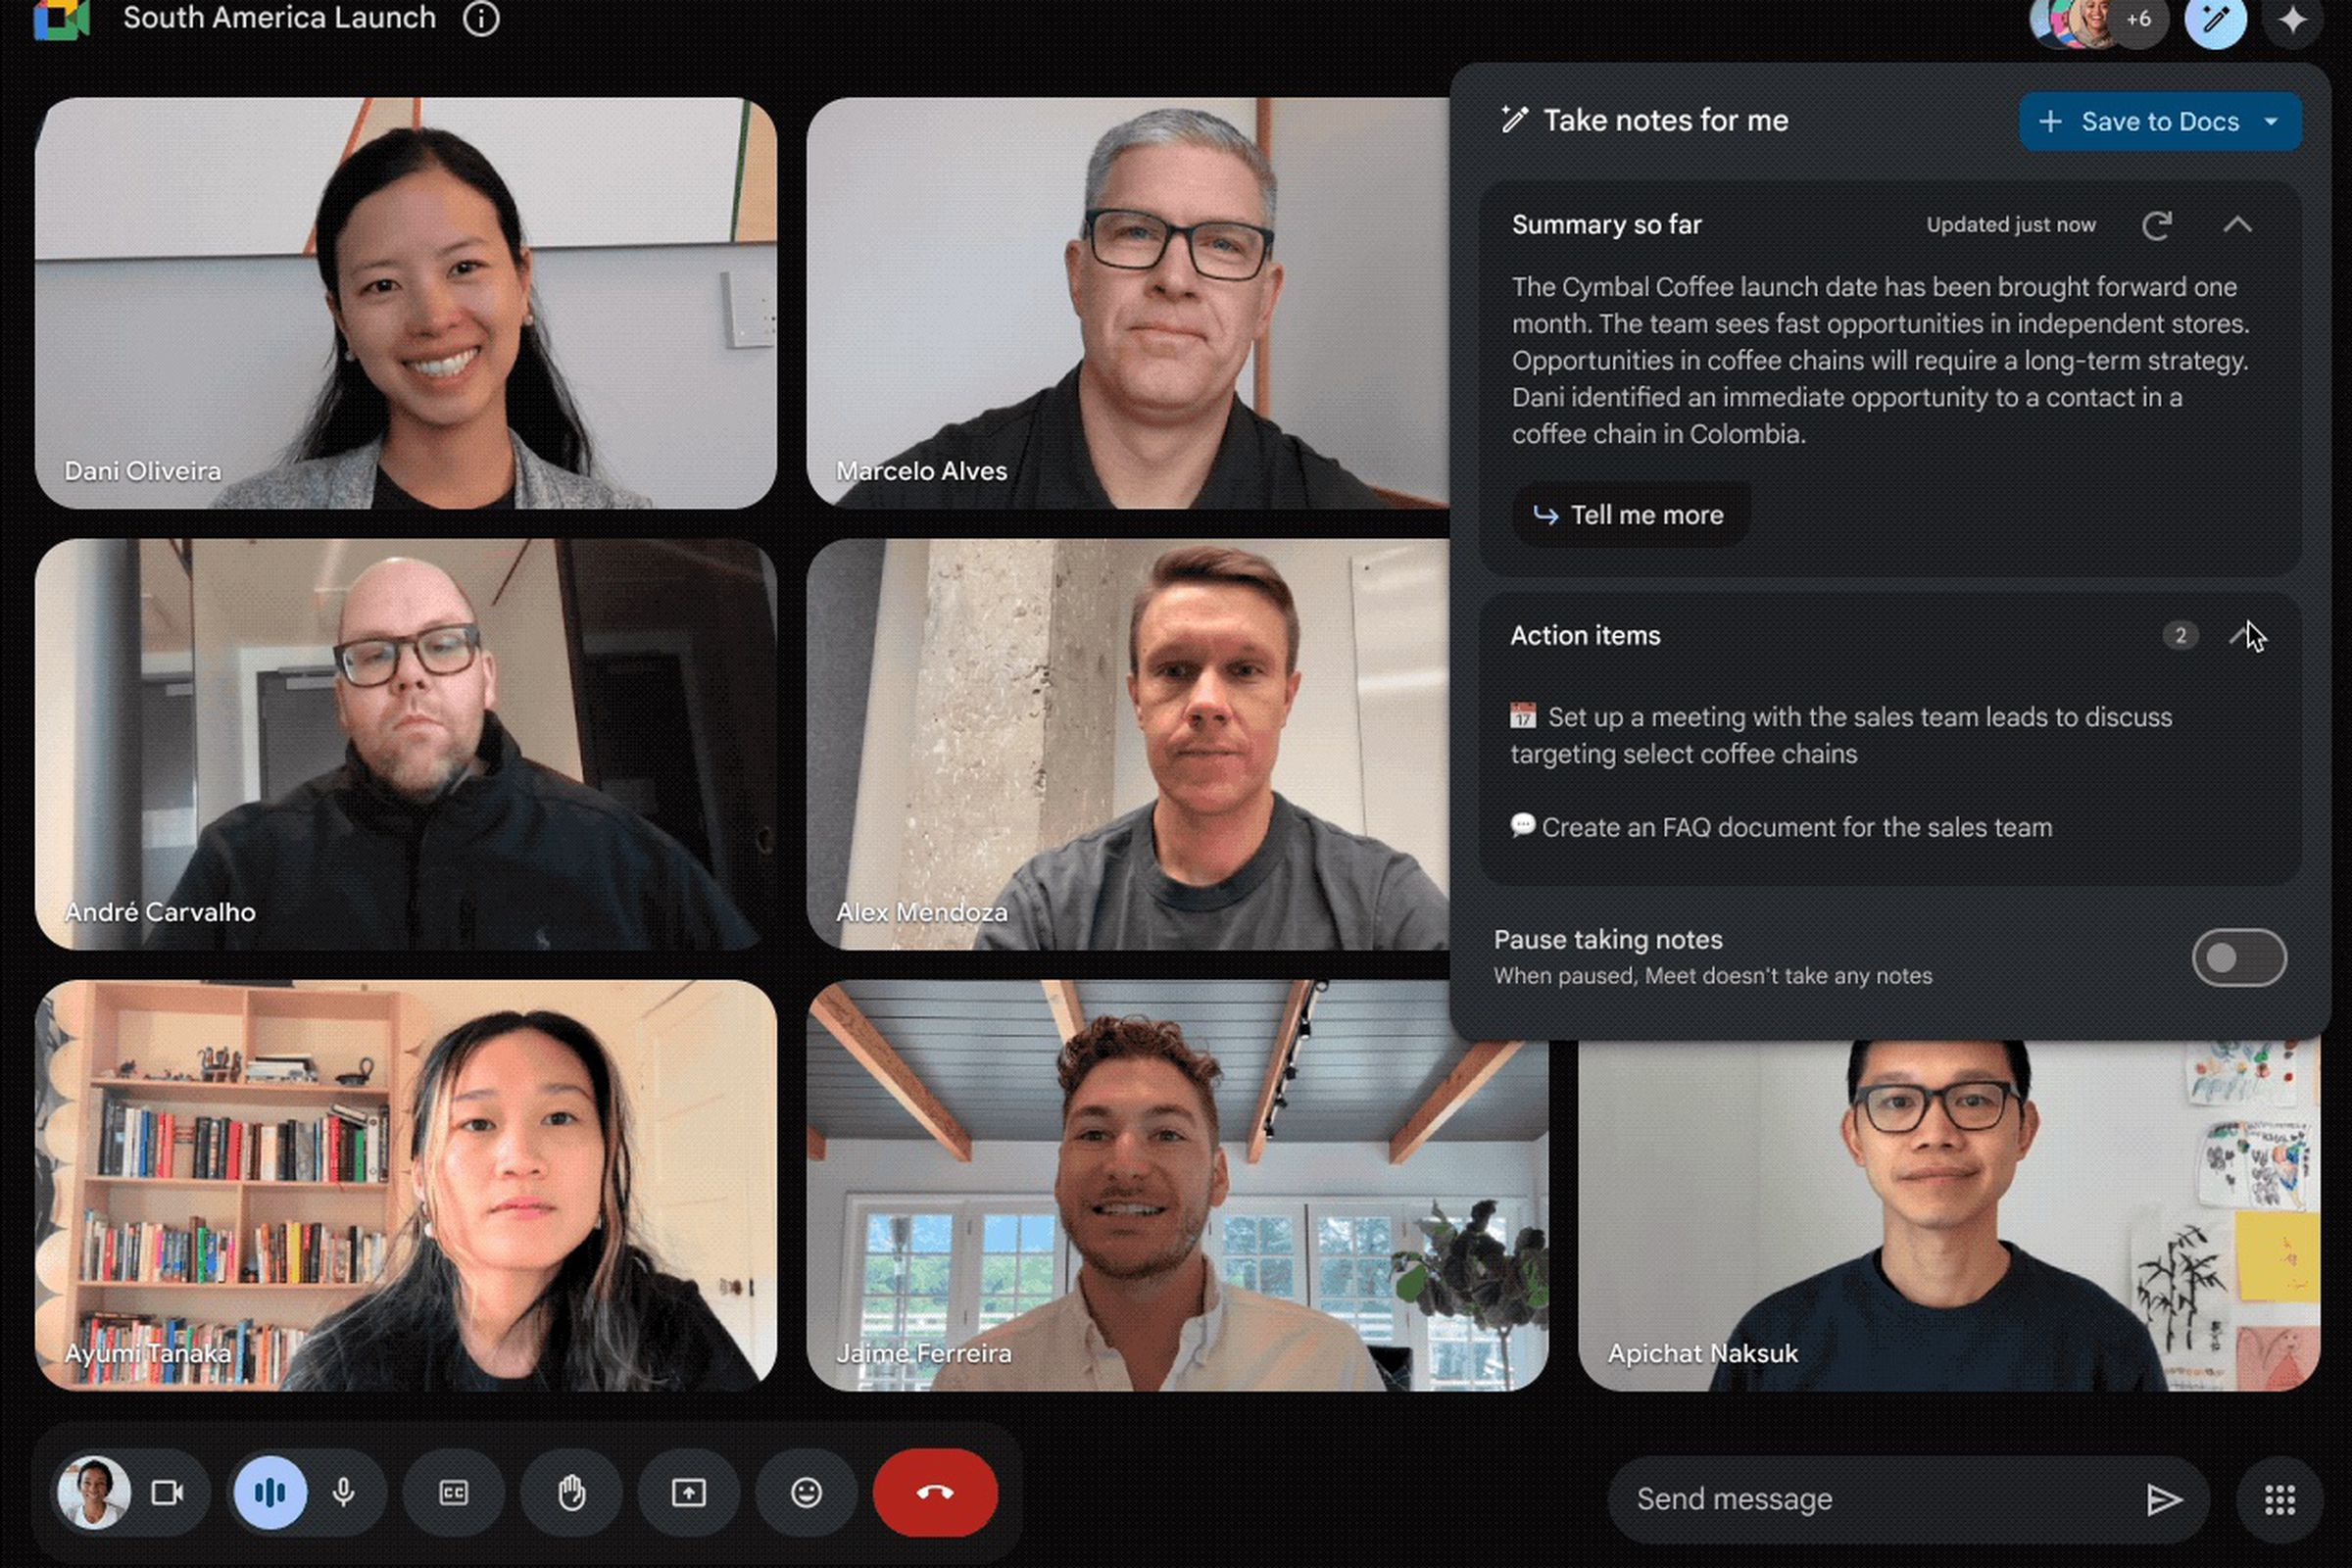 A screenshot of a Meet video call, with the “Take notes for me” menu enabled.